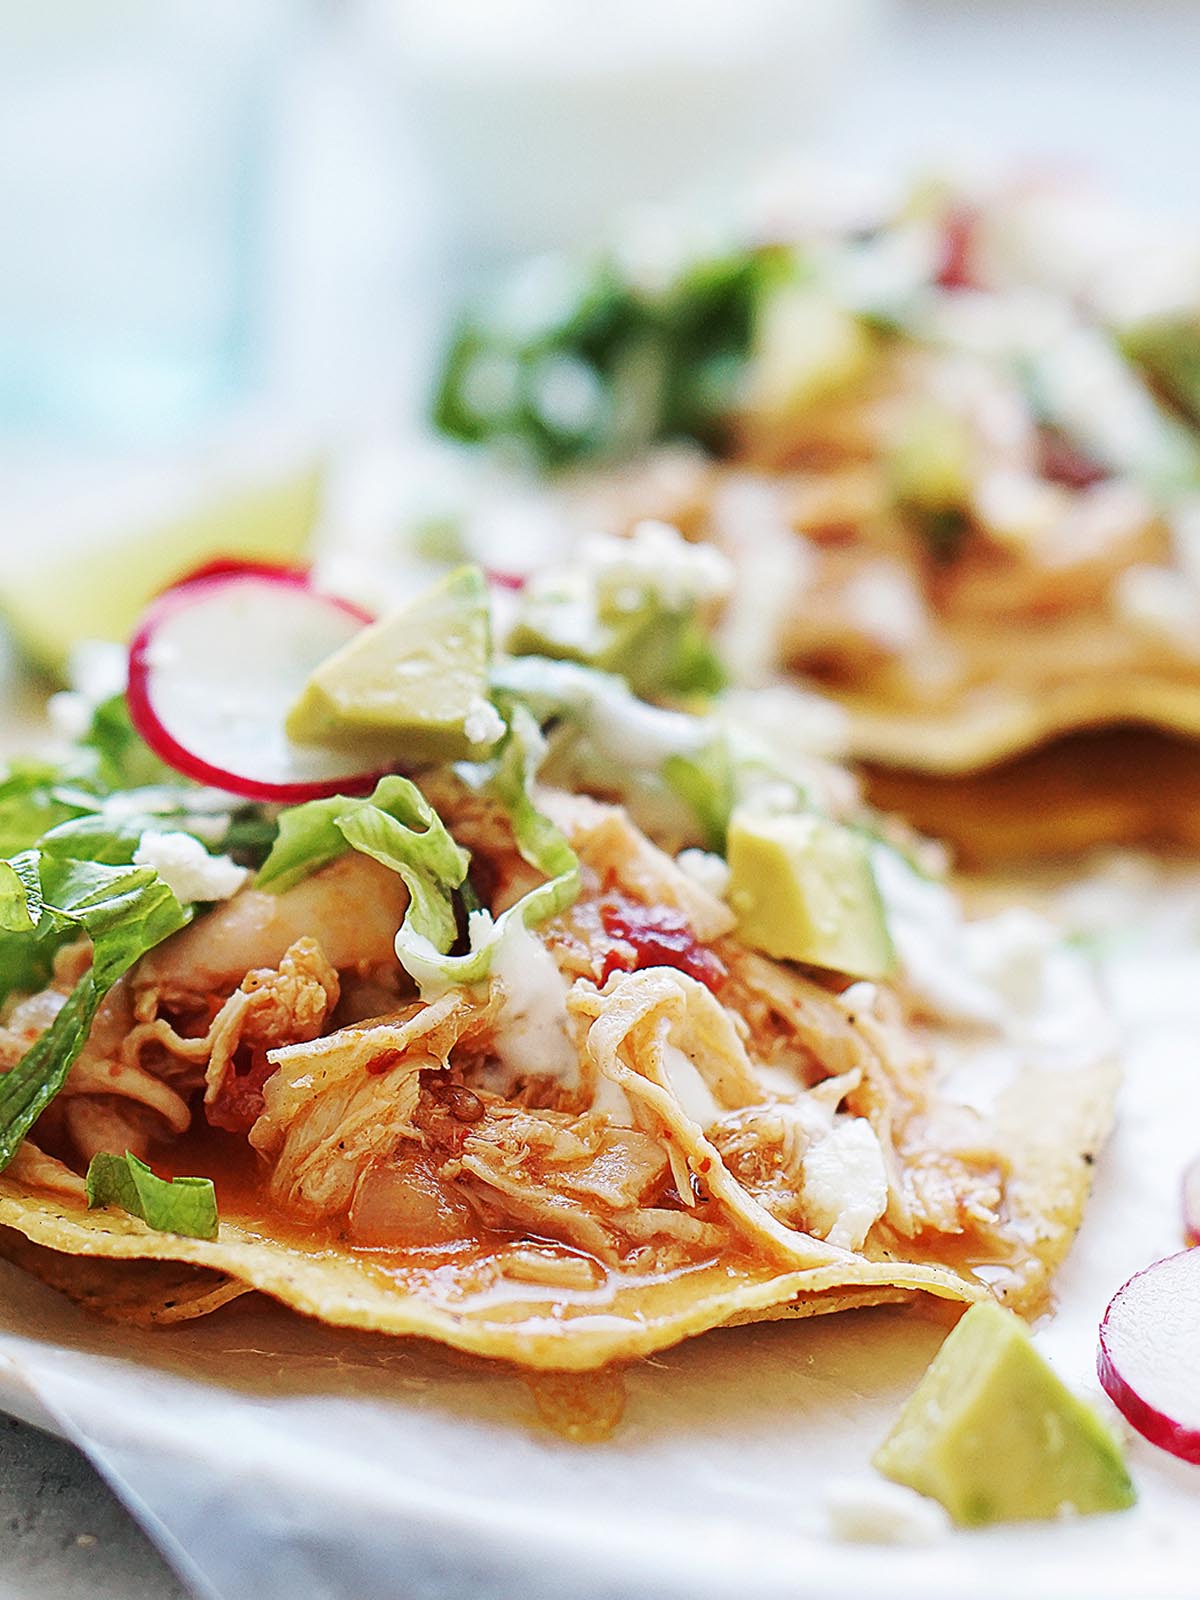 Two tinga tostadas on a plate garnished with lettuce and slices of radishes.